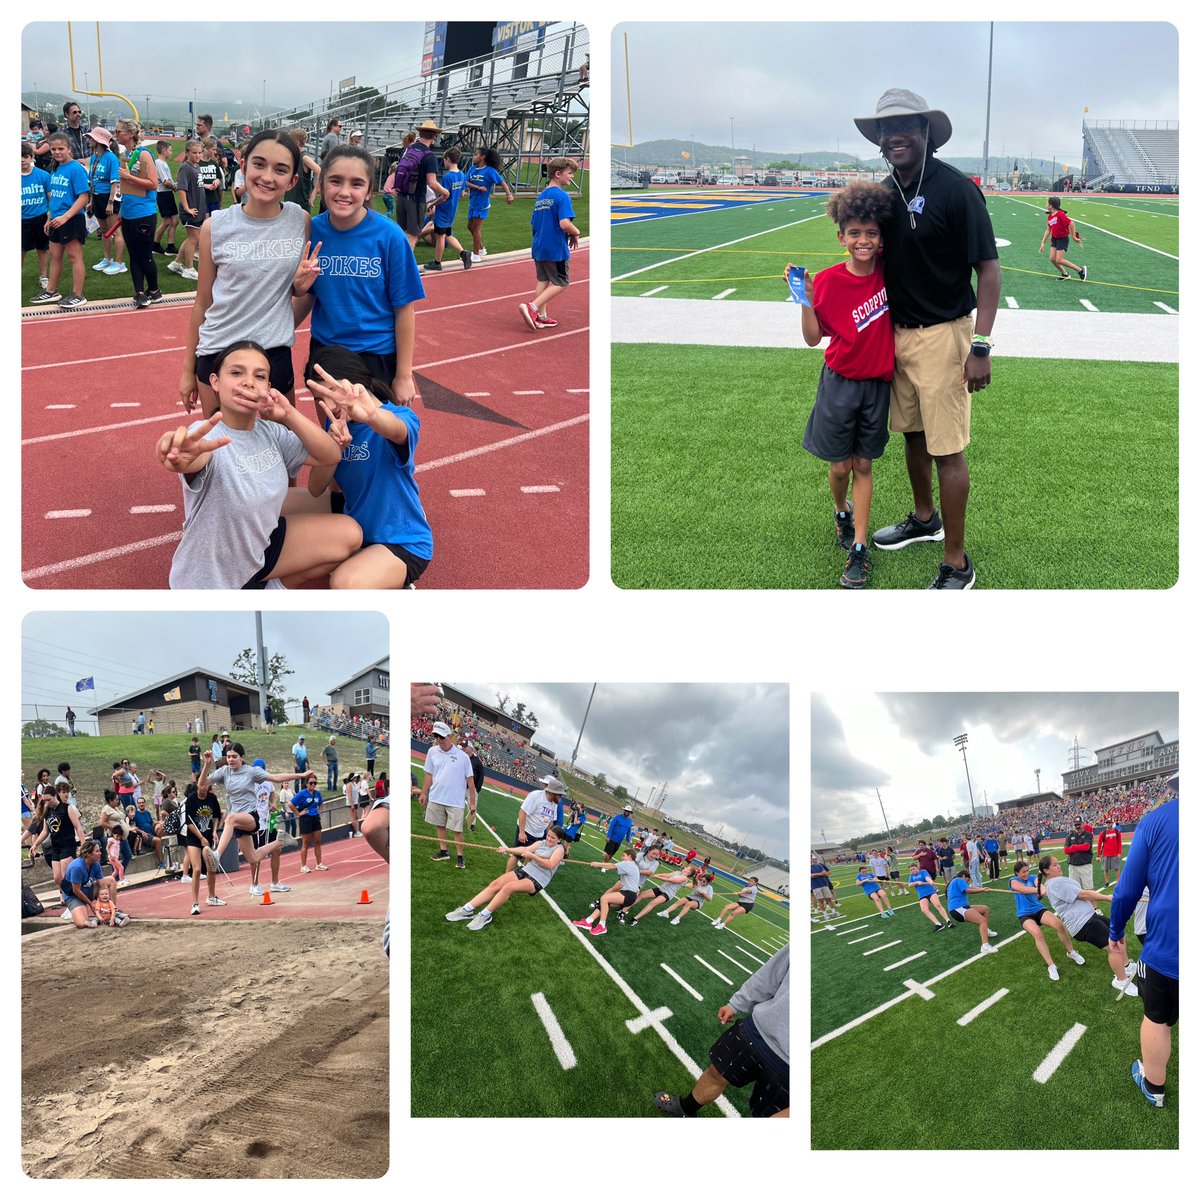 Our @HPetersonMS future student-athletes competed well at Little Olympics. Thank you to all the volunteers and the Kerrville @Kiwanis for putting together a fantastic event for our community. #TogetherWeCan #KISDinspires #TFNDtradition